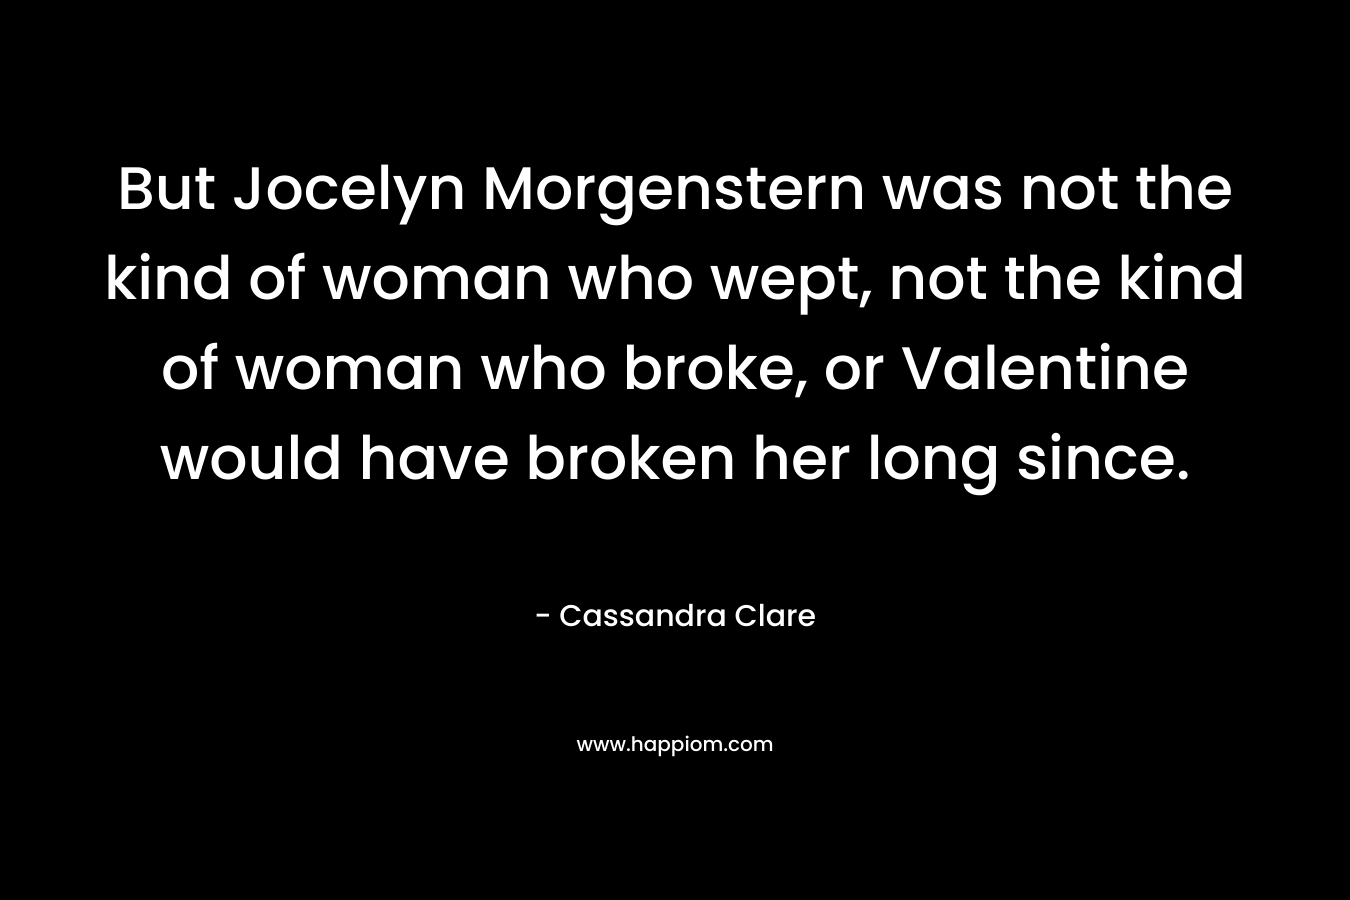 But Jocelyn Morgenstern was not the kind of woman who wept, not the kind of woman who broke, or Valentine would have broken her long since.